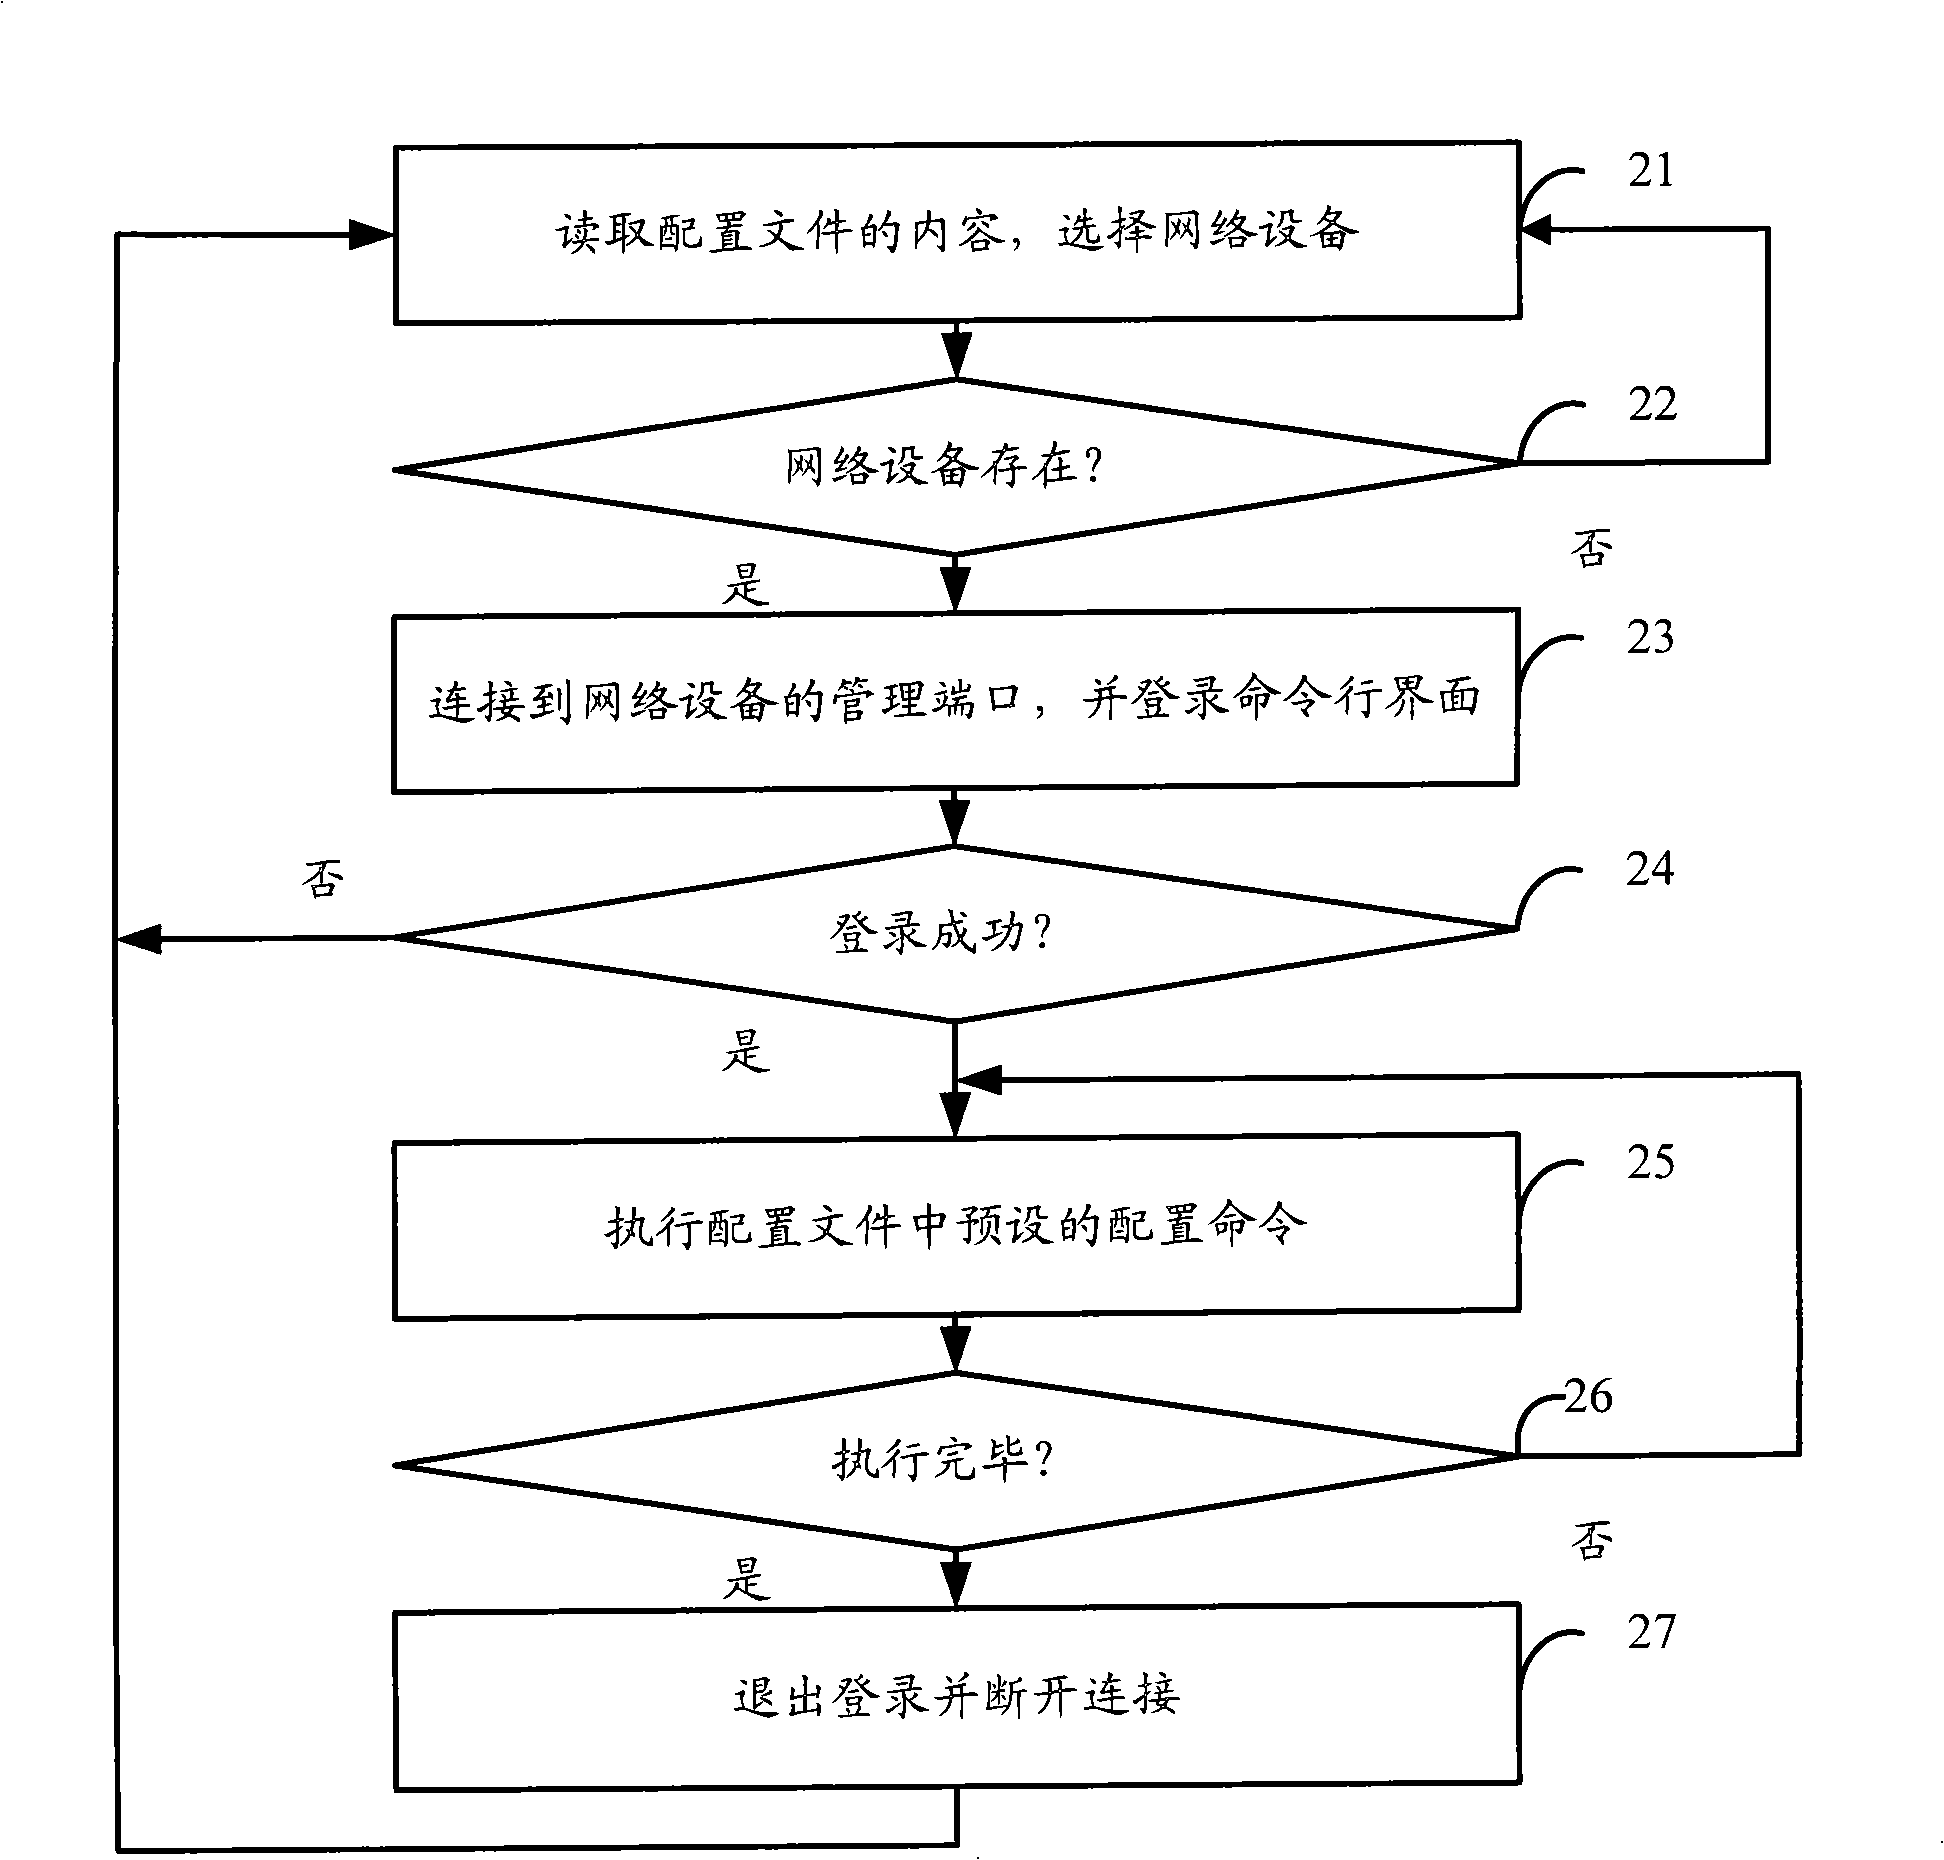 A method and system for modifying configuration of network device in batch mode